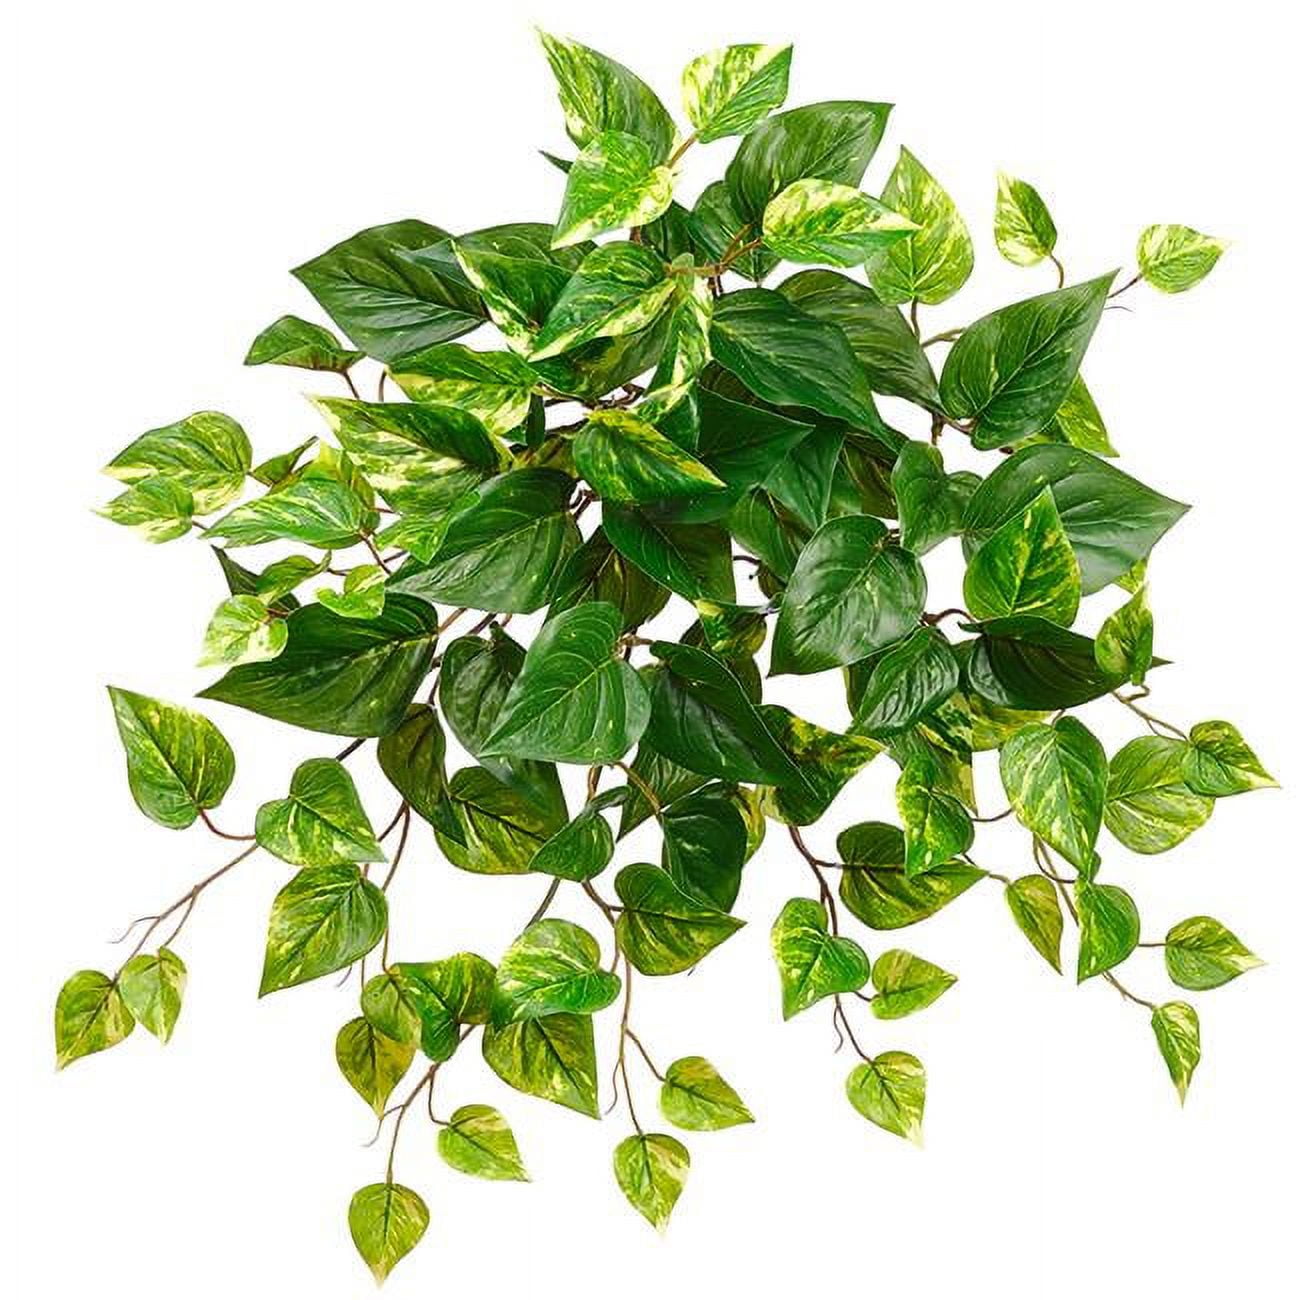 Picture of AllState Floral PBP202-GR-WH 20 in. UV Protected Pothos Bush - Green &amp; White - Pack of 12